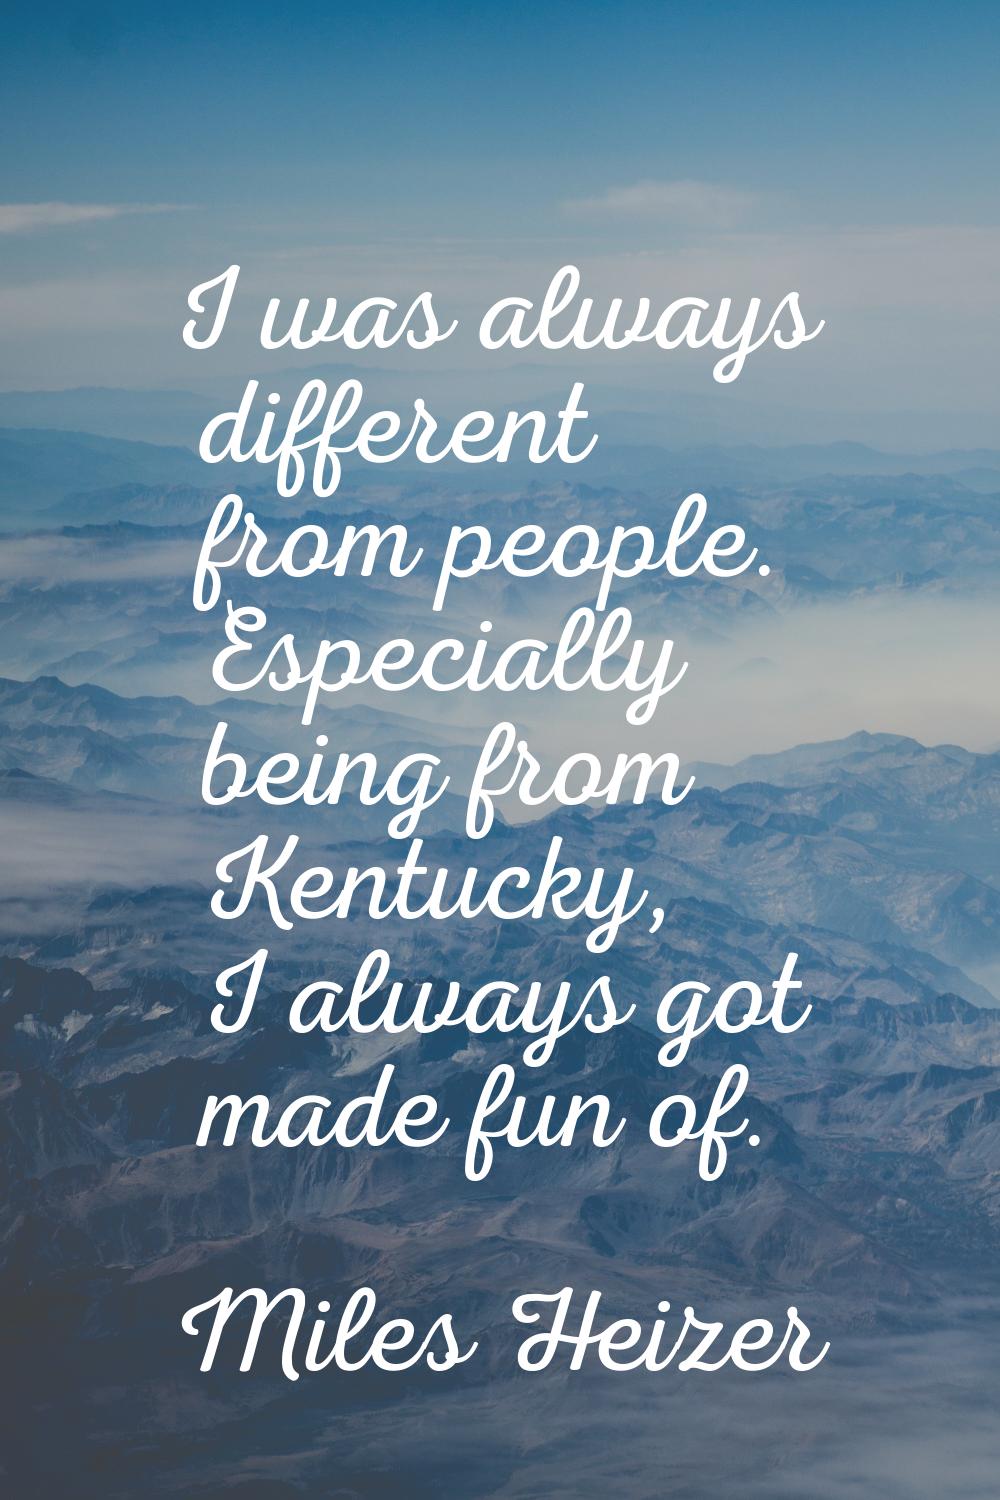 I was always different from people. Especially being from Kentucky, I always got made fun of.